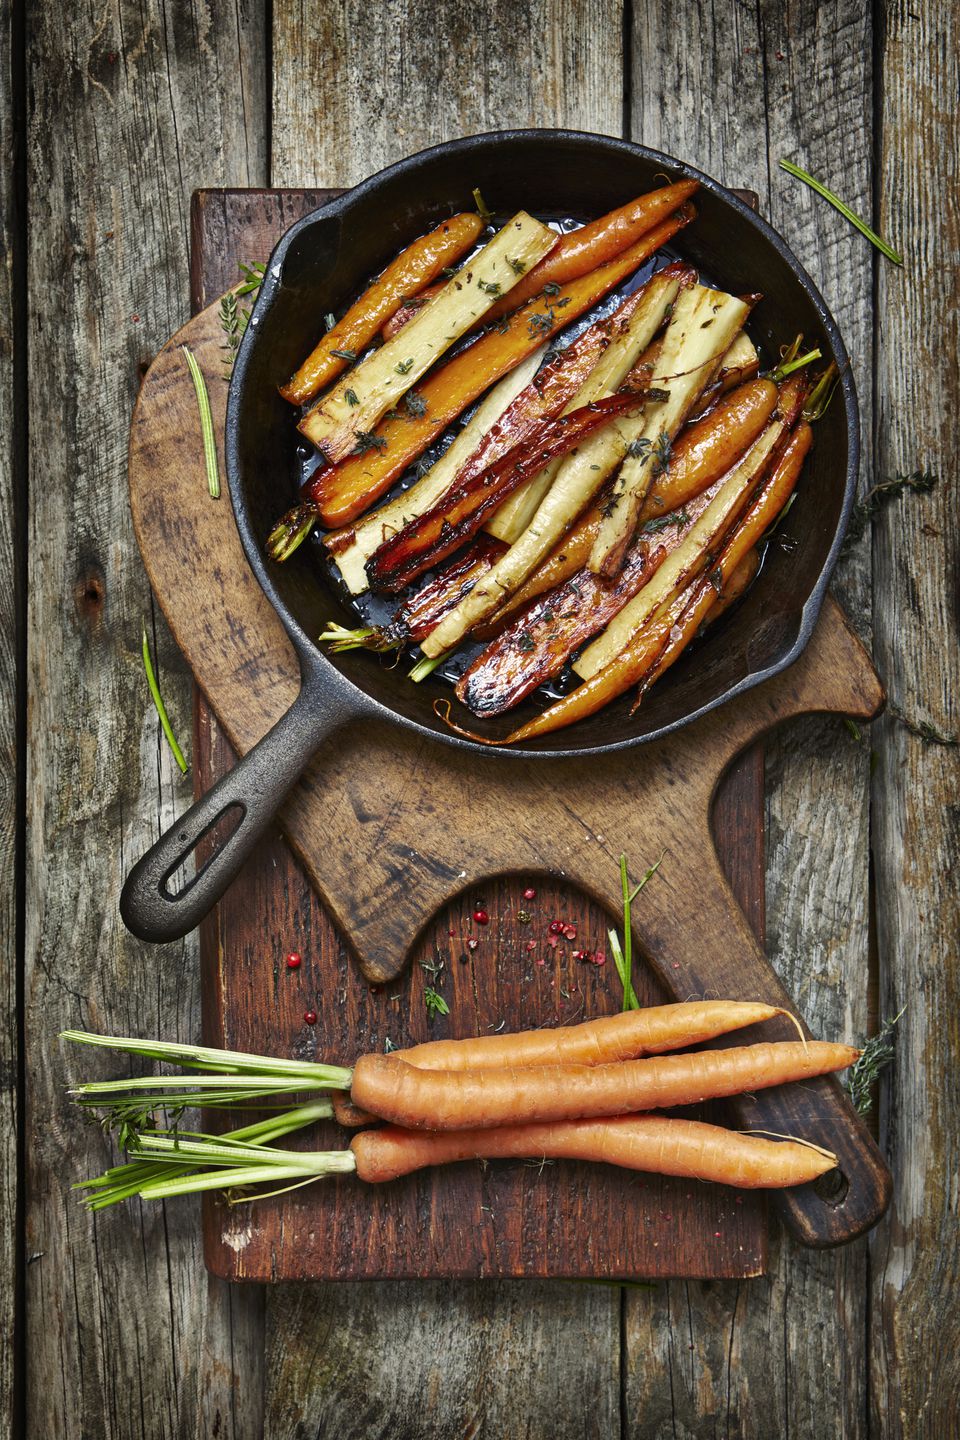 Easy Roasted Carrots With Parsnips and Herbs Recipe